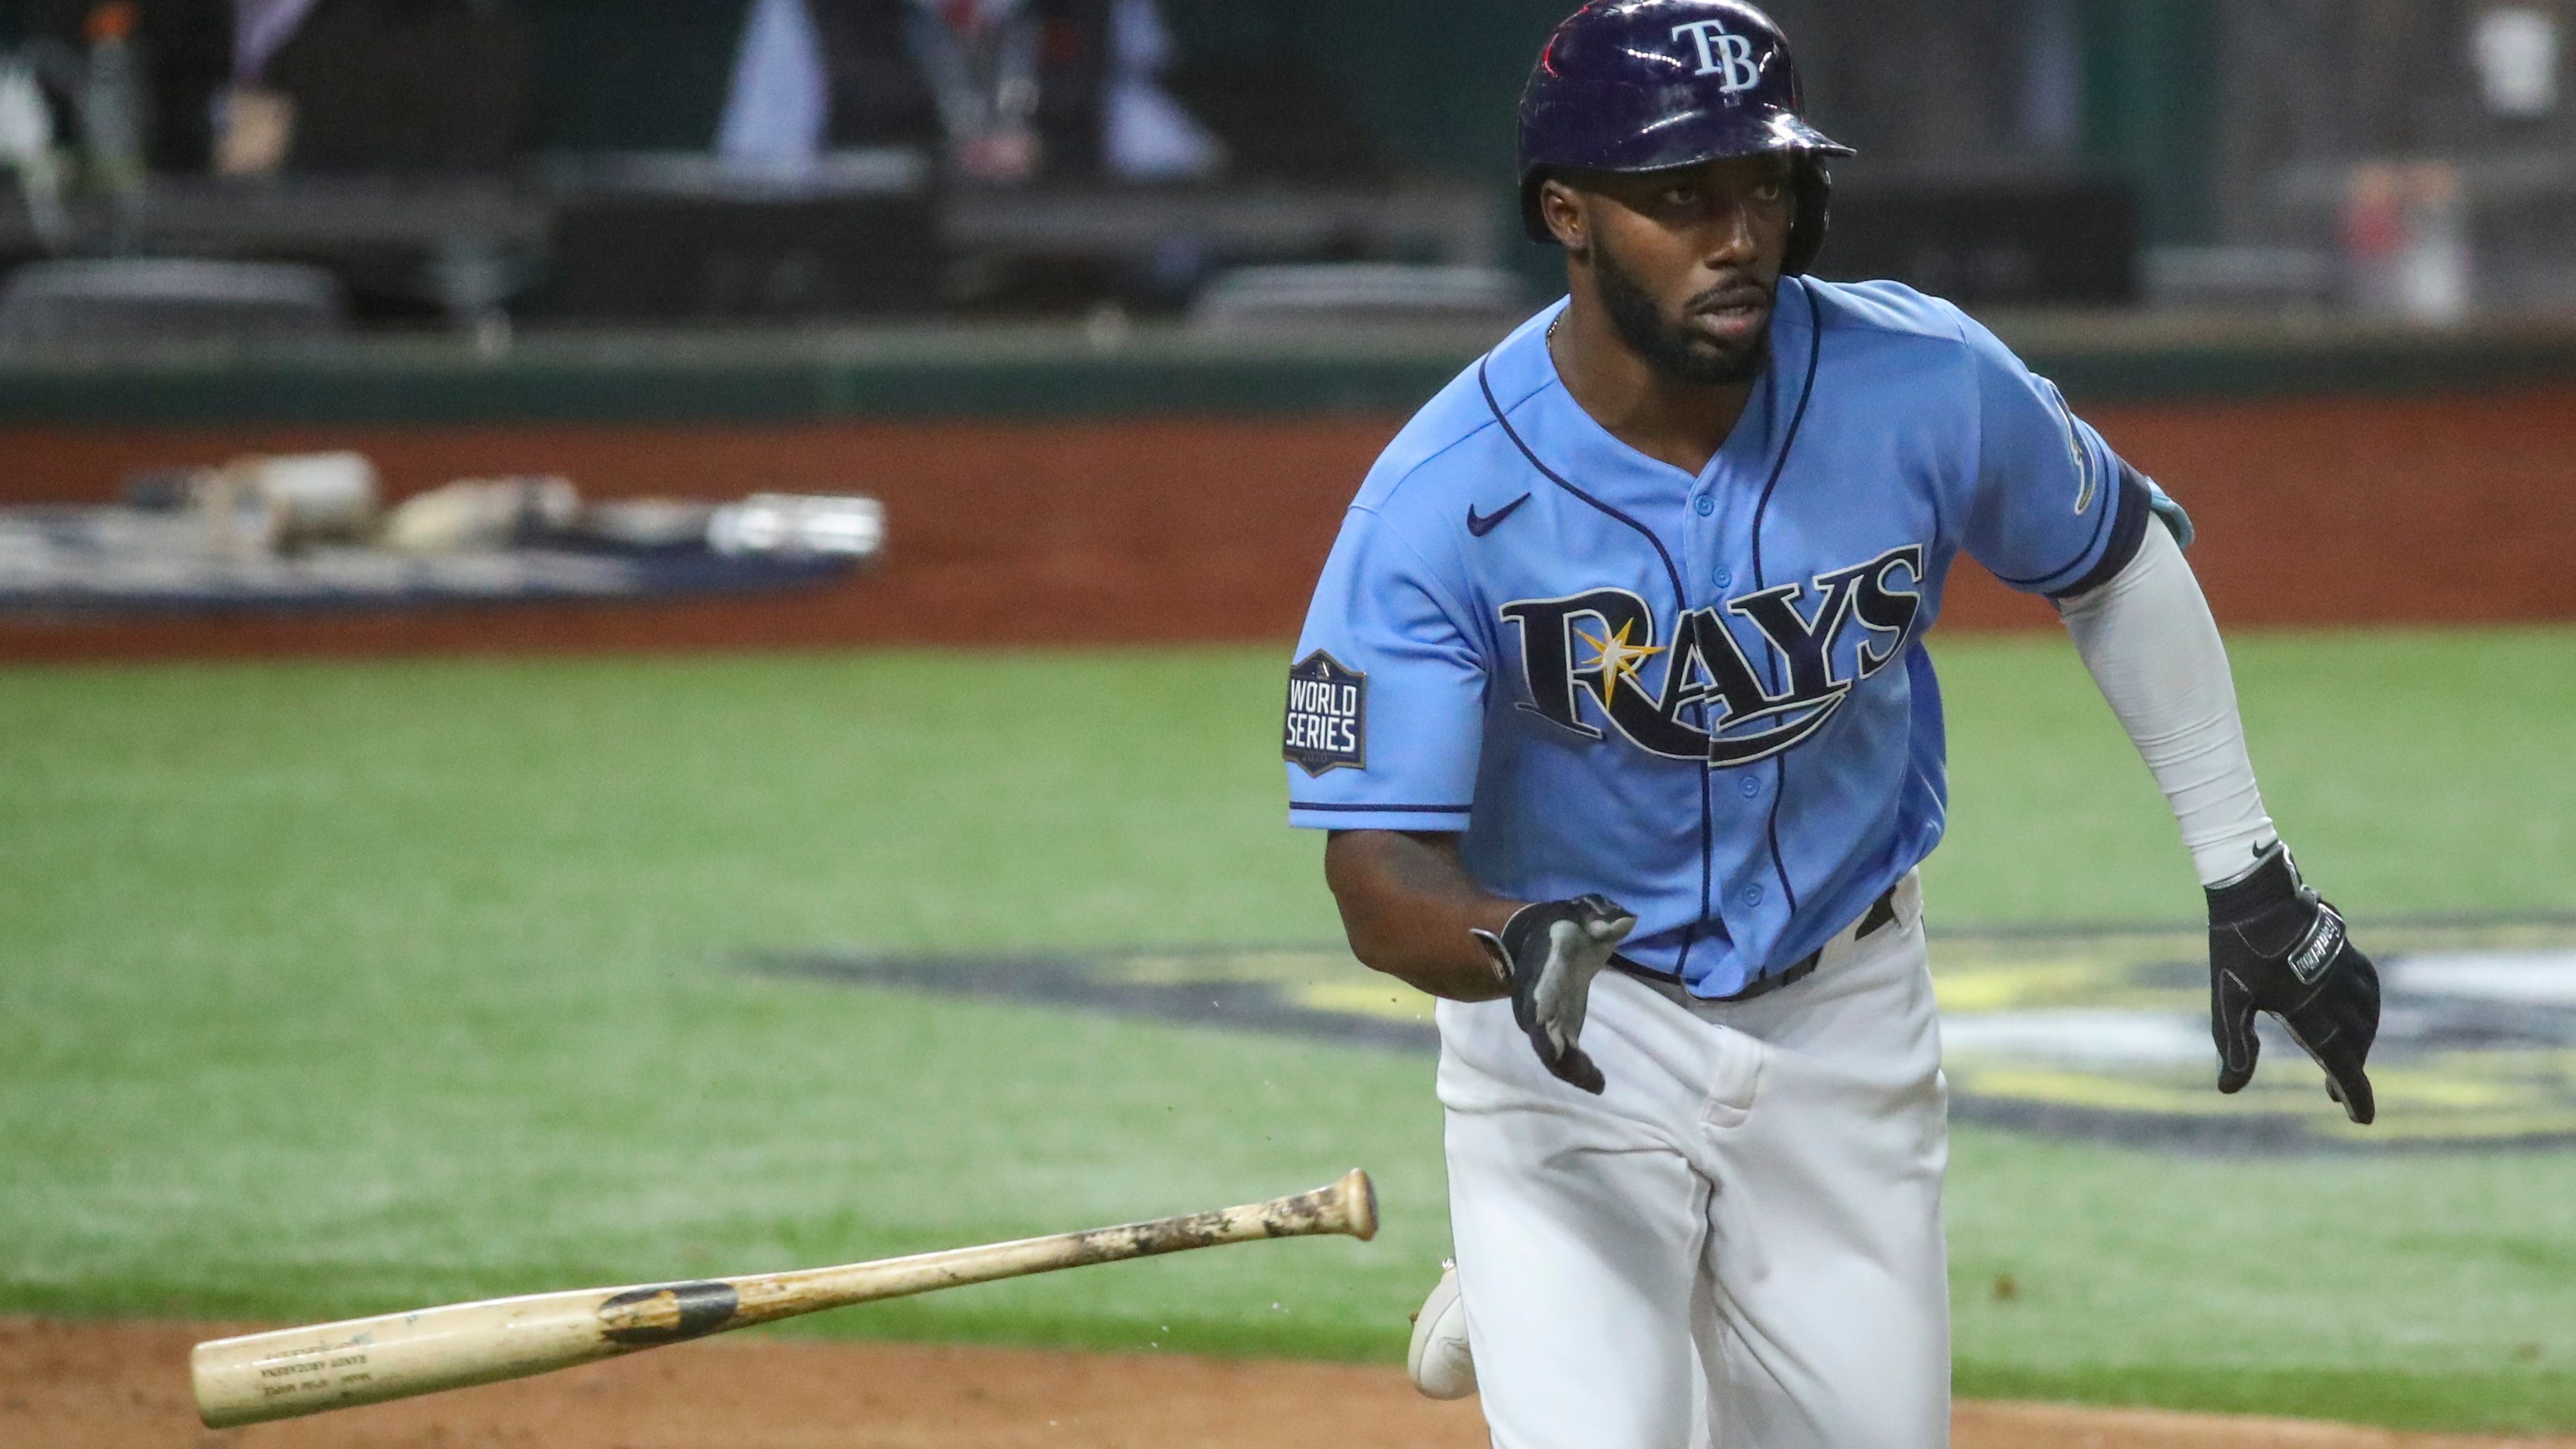 Another game, another postseason record for Rays' Randy Arozarena